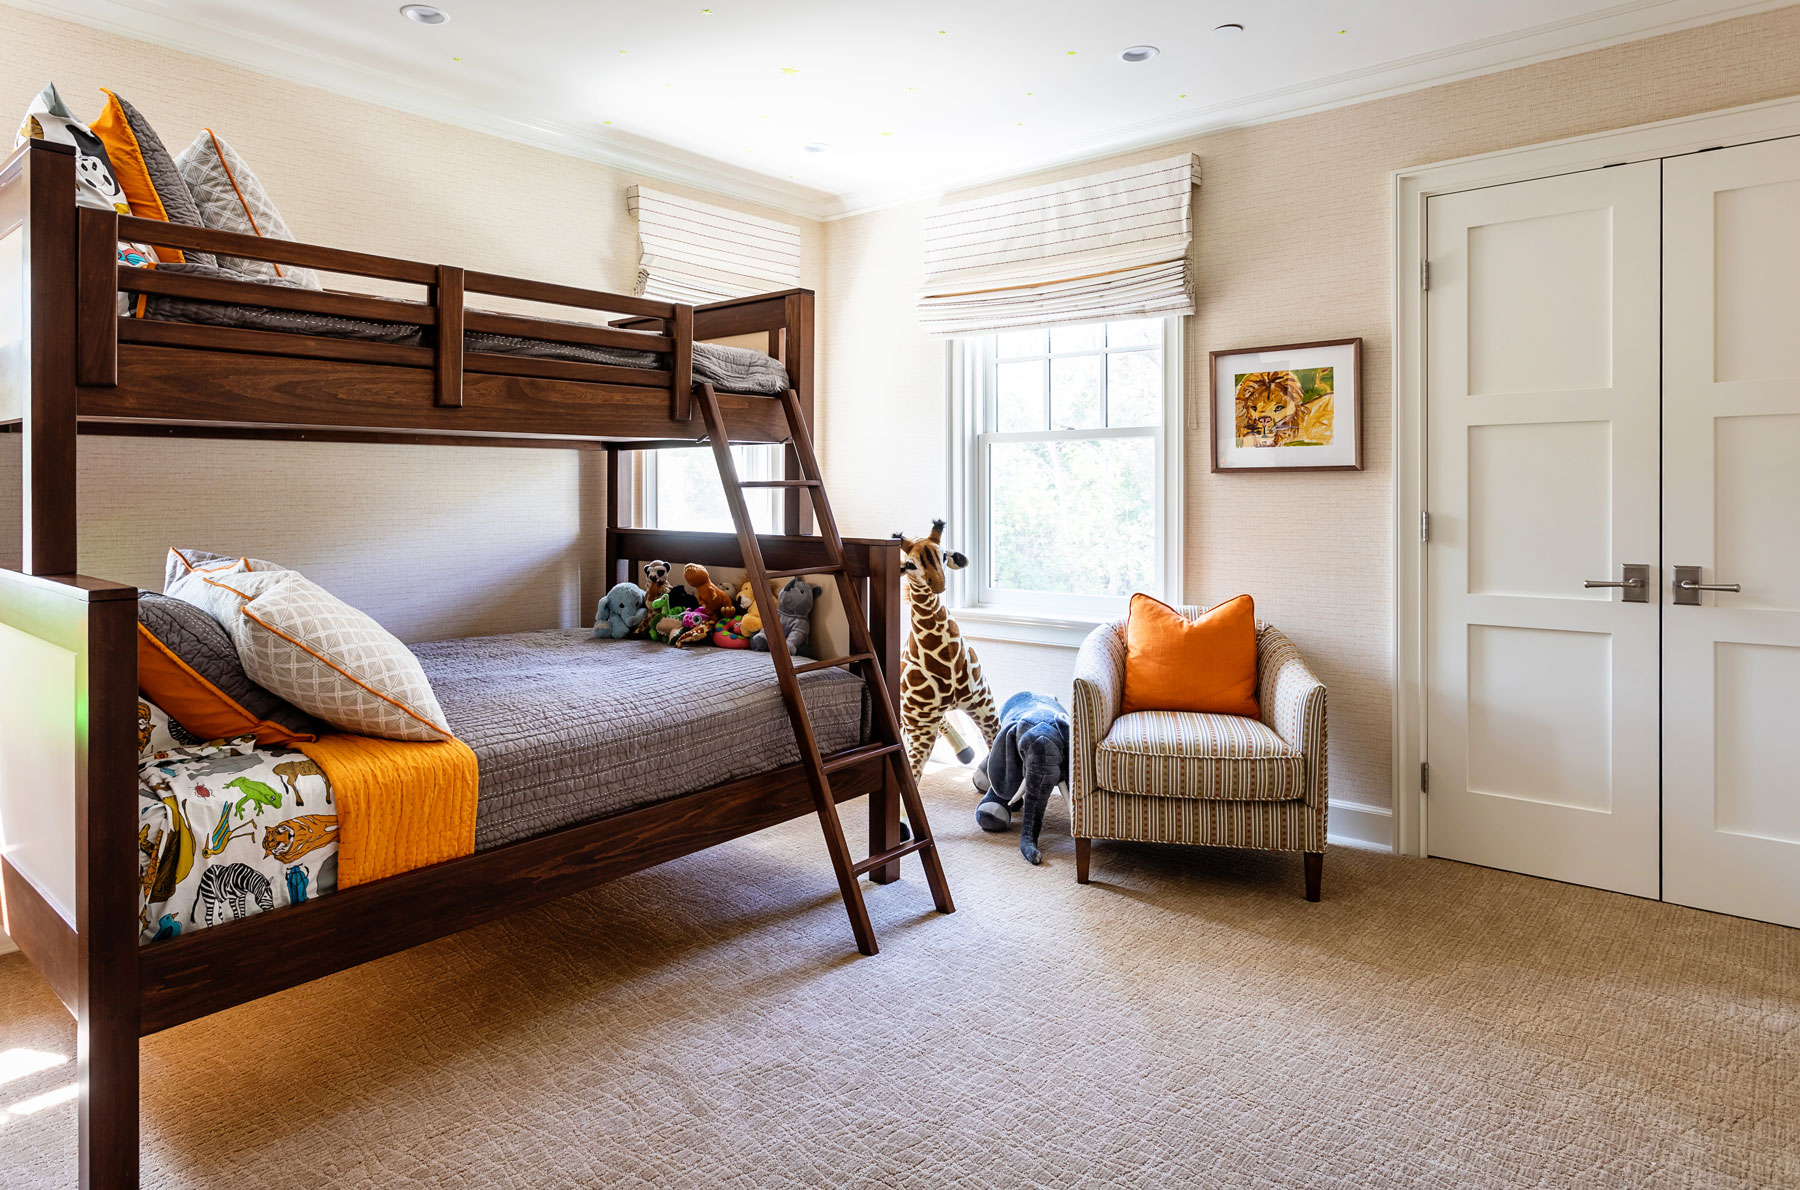 kids-room-bunk-beds-taupe-orange-waterford-construction.jpg